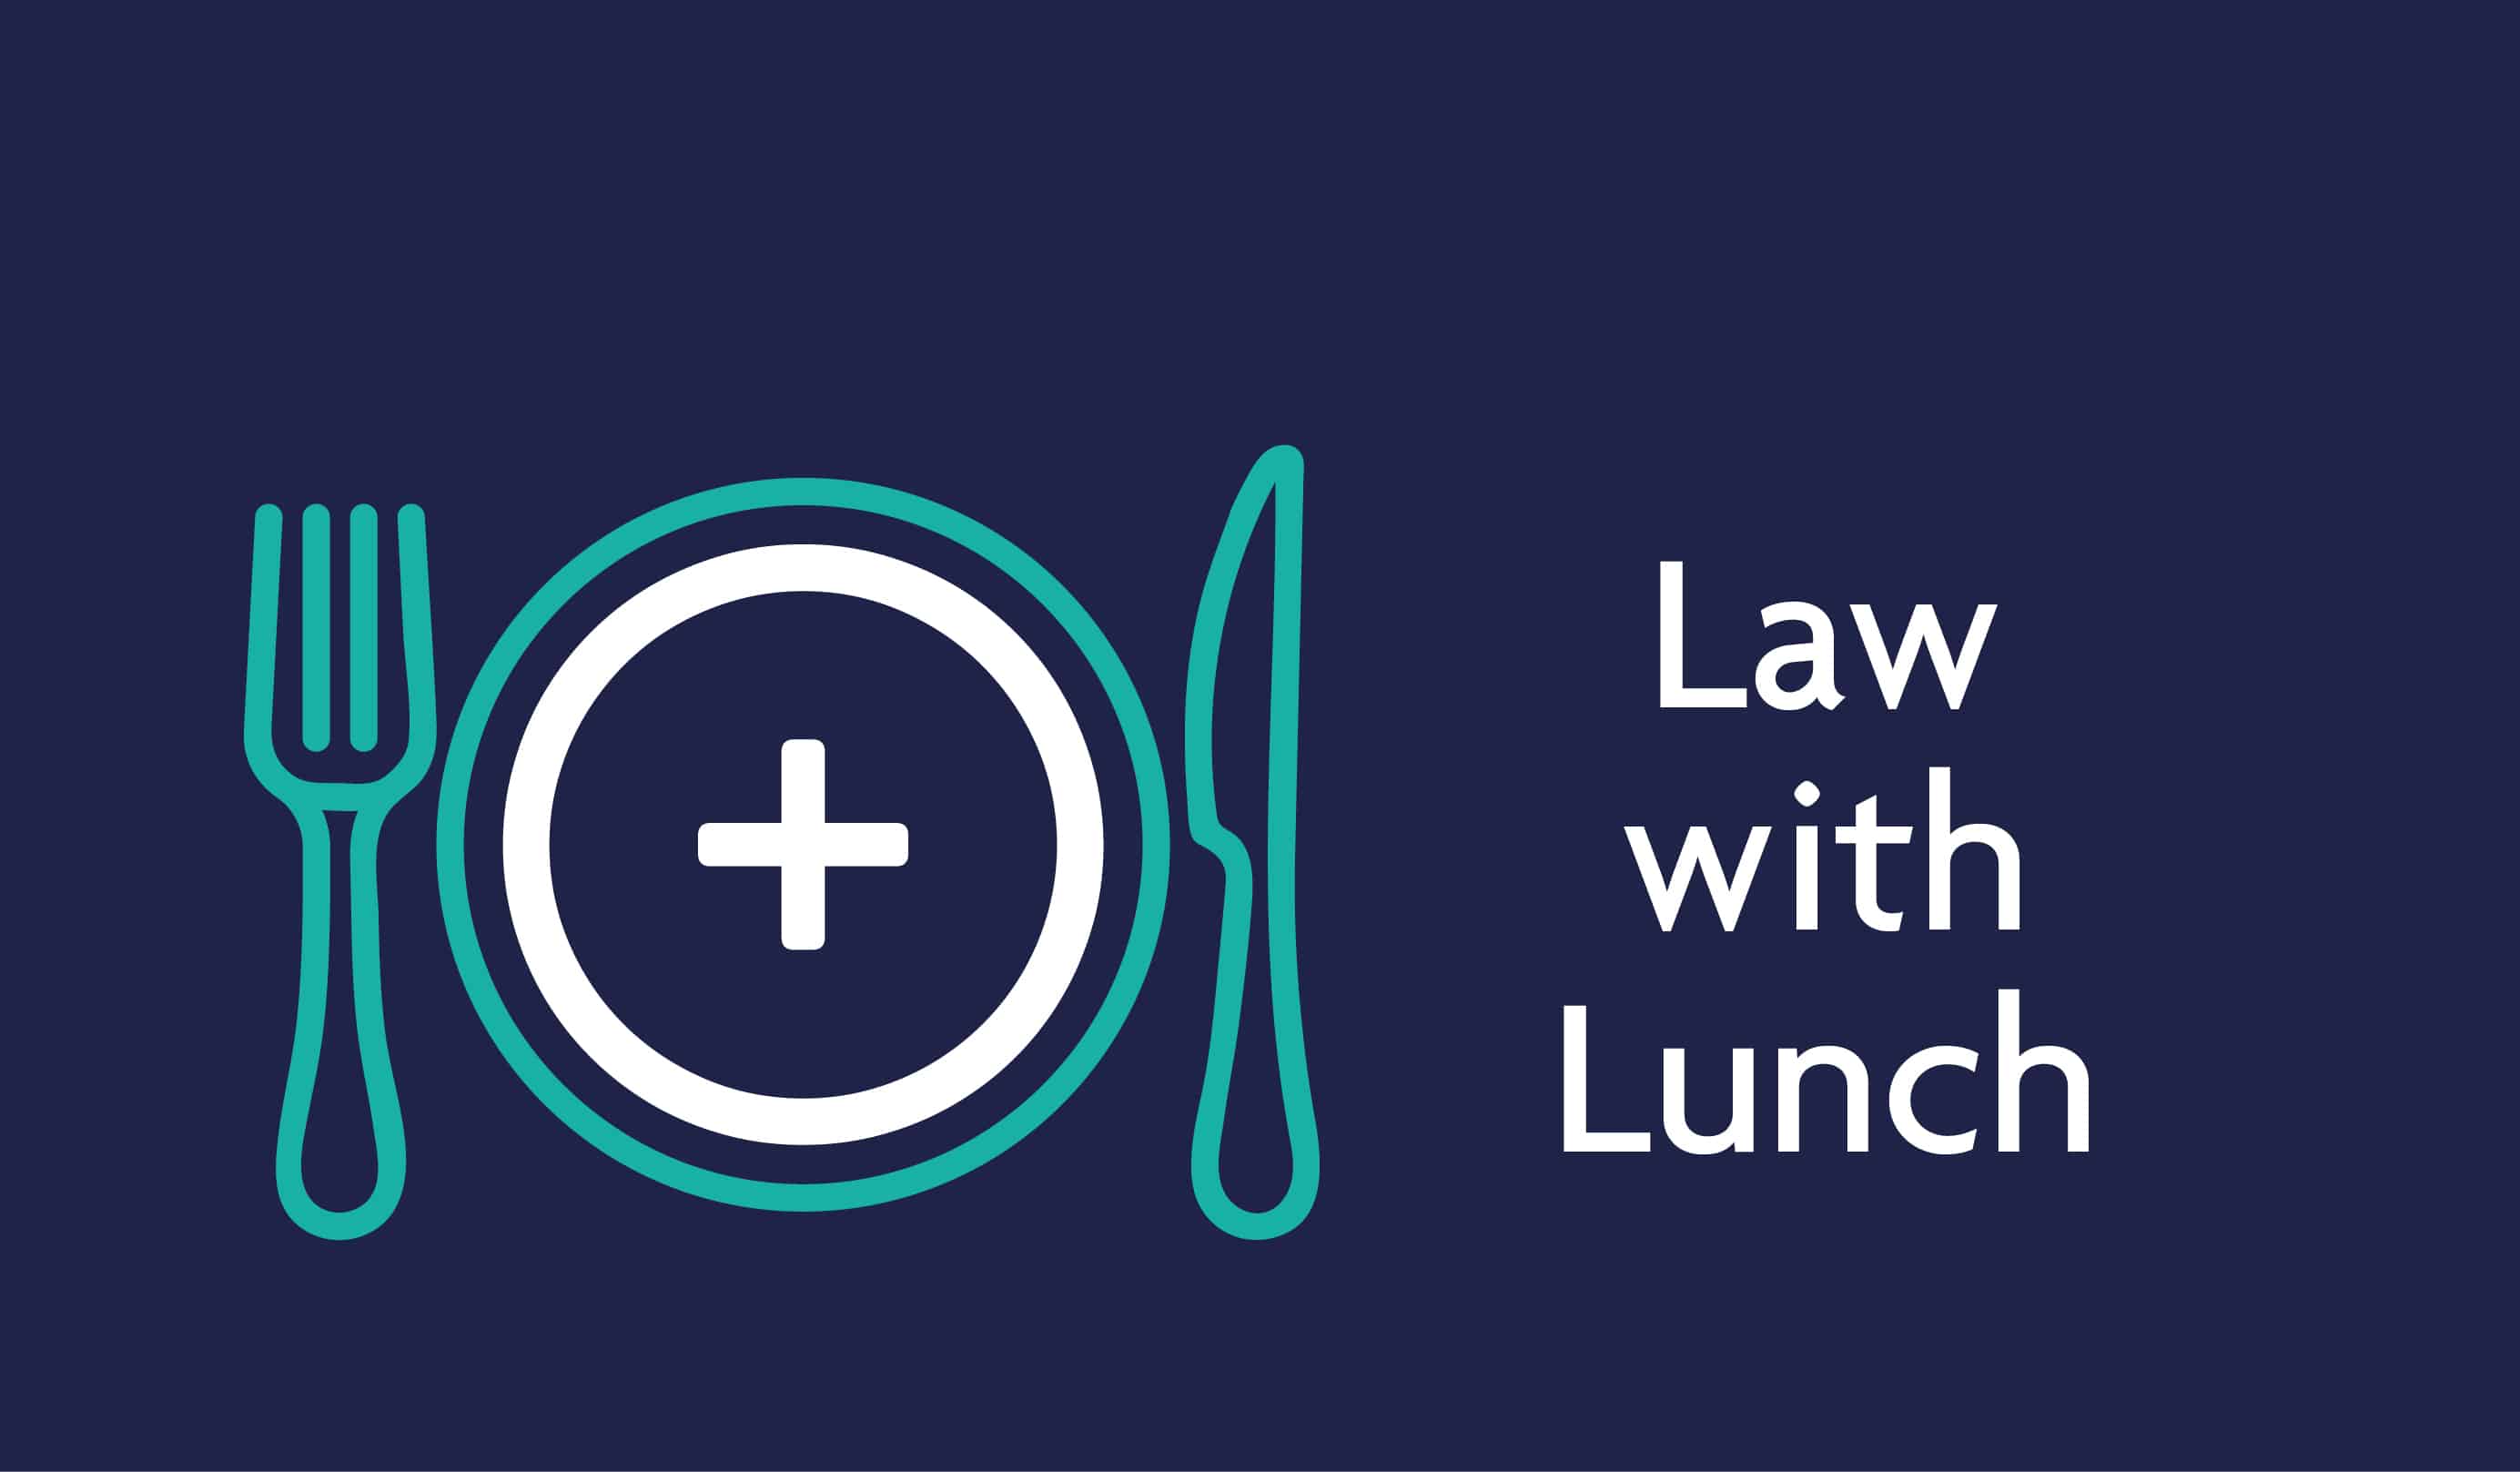 Clinical Negligence & Personal Injury | ‘Law with Lunch’ Webinar Series | 26 May 2022